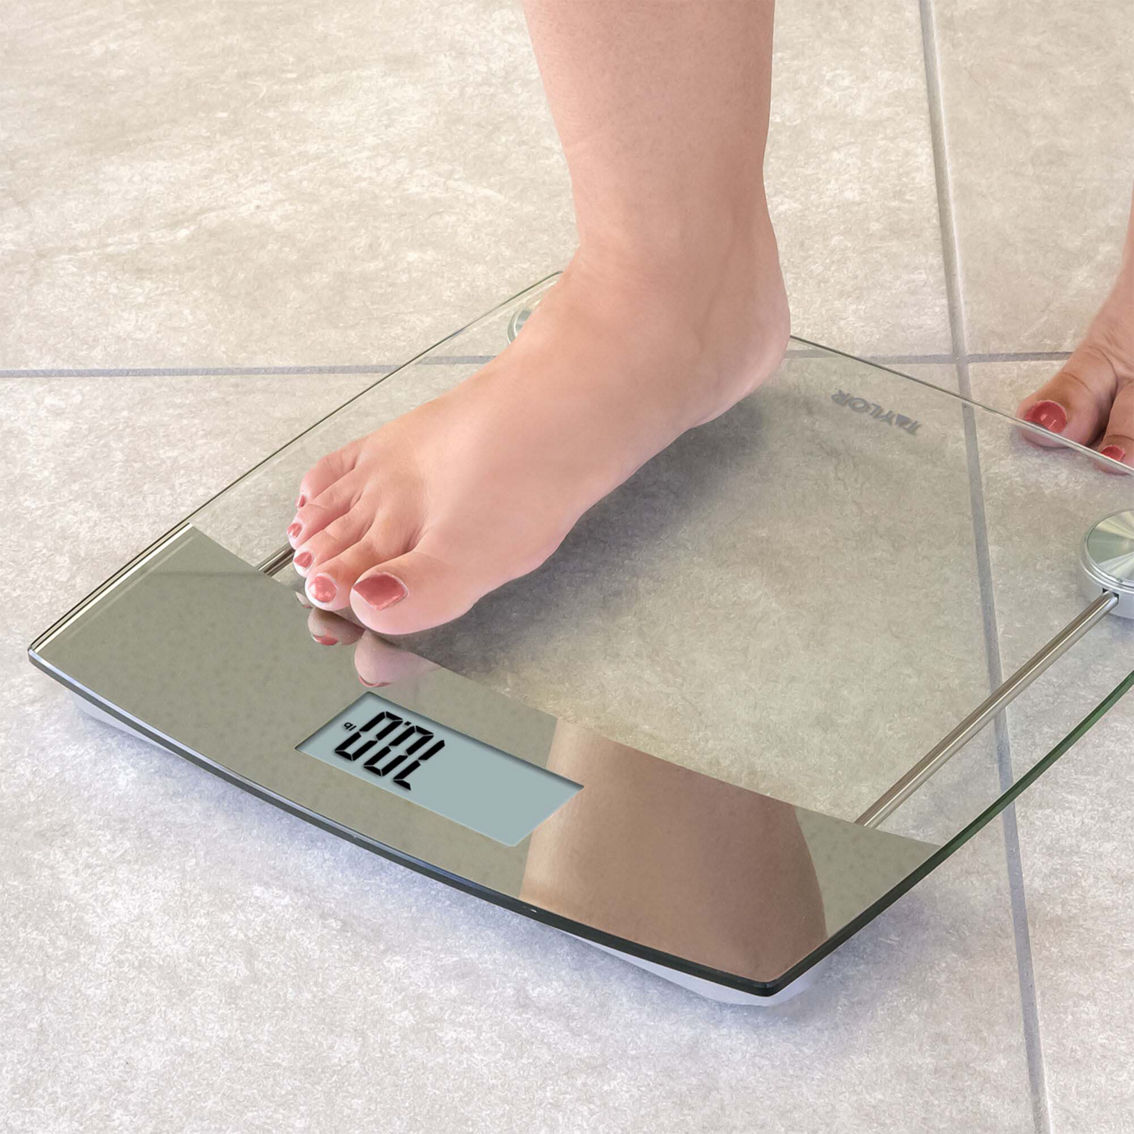 Taylor Digital Glass Bathroom Scale with Stainless Steel Accents - Image 4 of 4